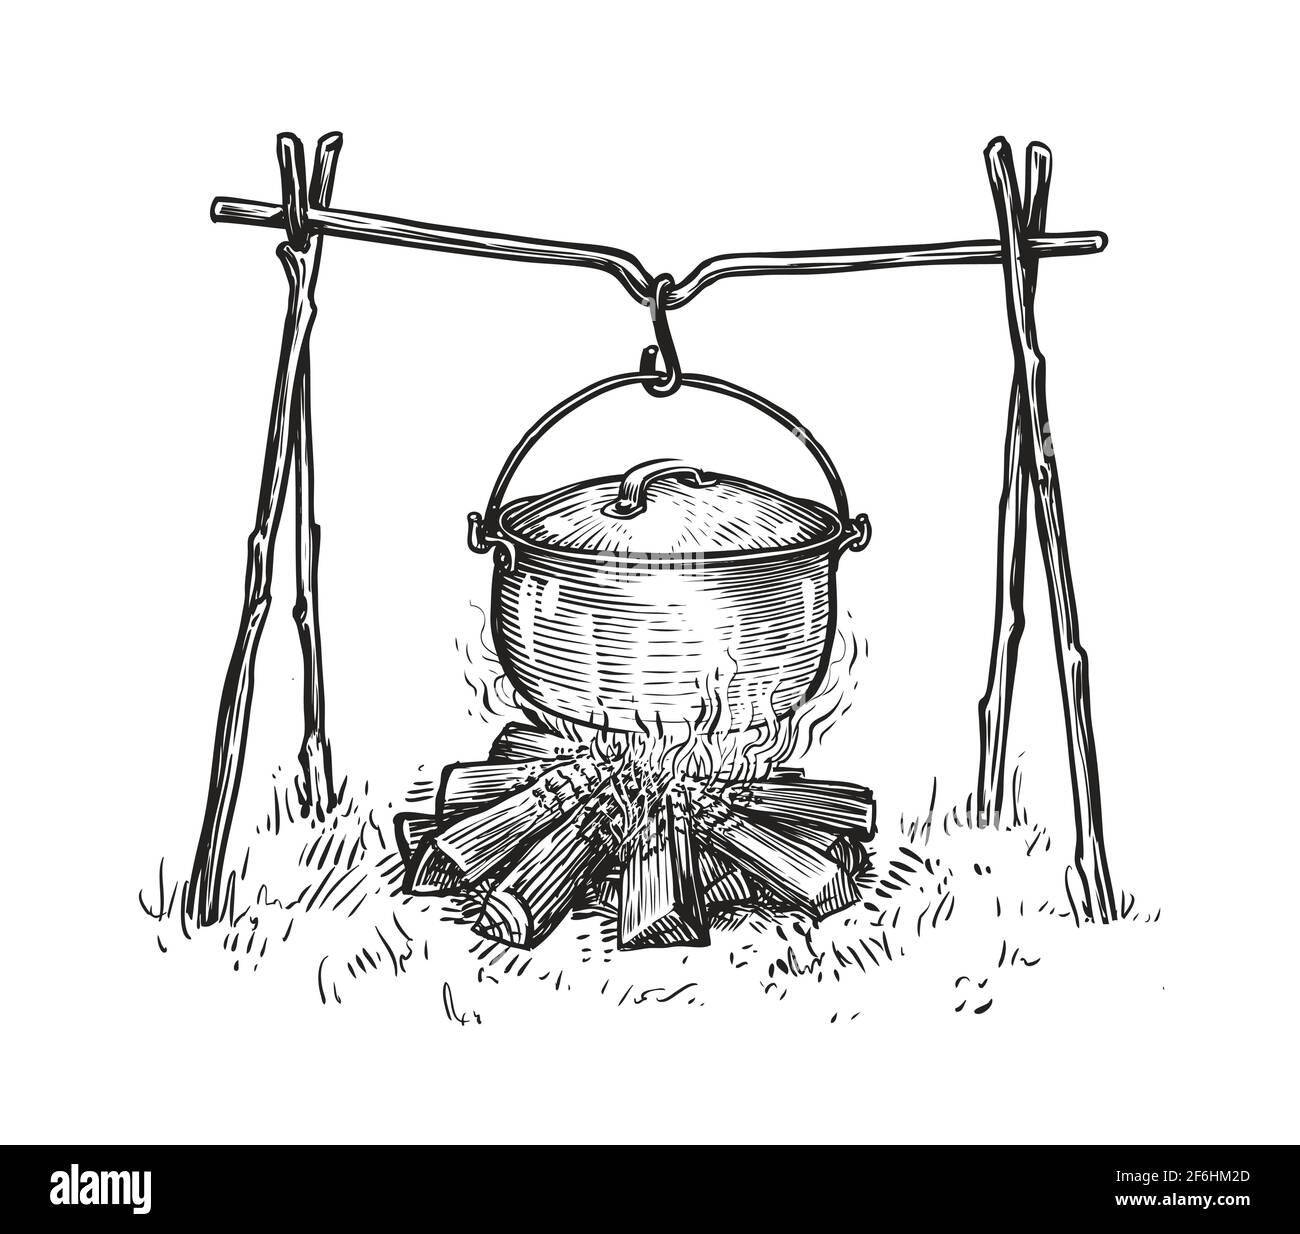 https://c8.alamy.com/comp/2F6HM2D/pot-on-campfire-sketch-cooking-in-a-cauldron-on-flame-hand-drawn-vector-illustration-2F6HM2D.jpg